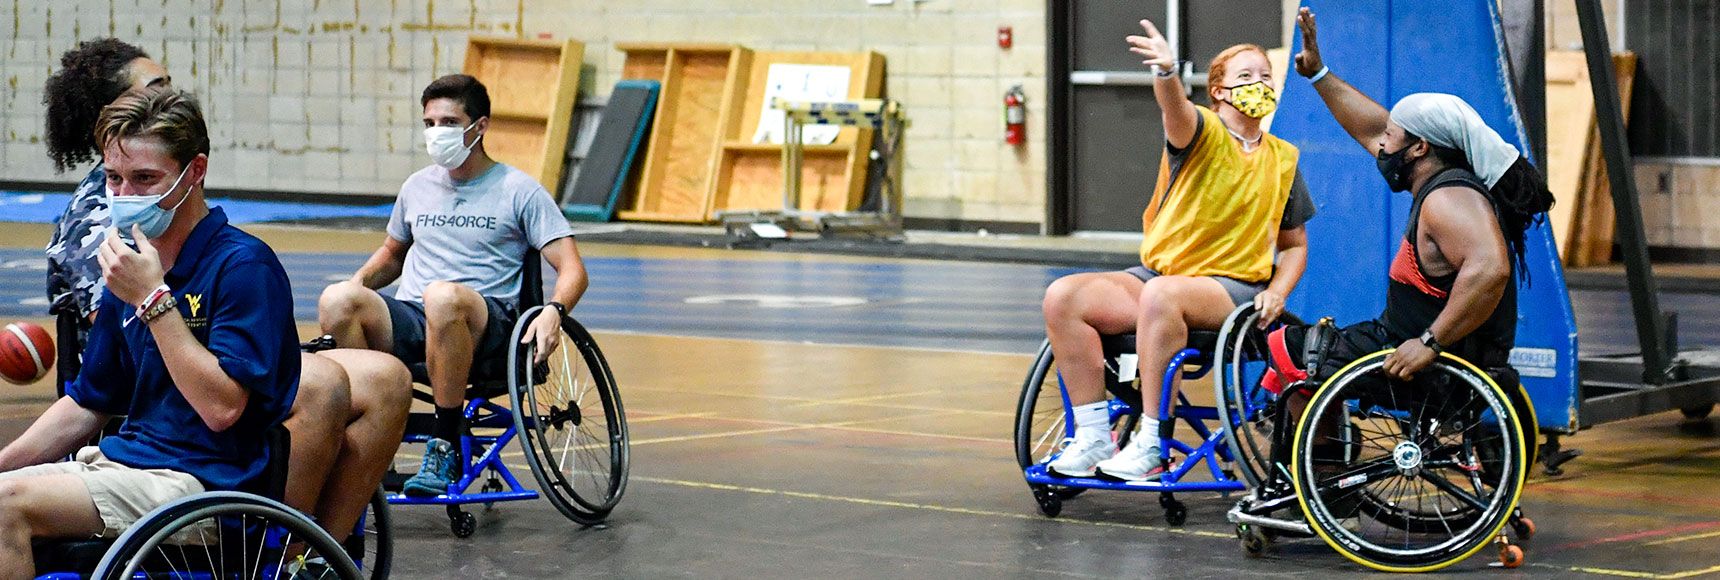 Players celebrating during wheelchair basketball